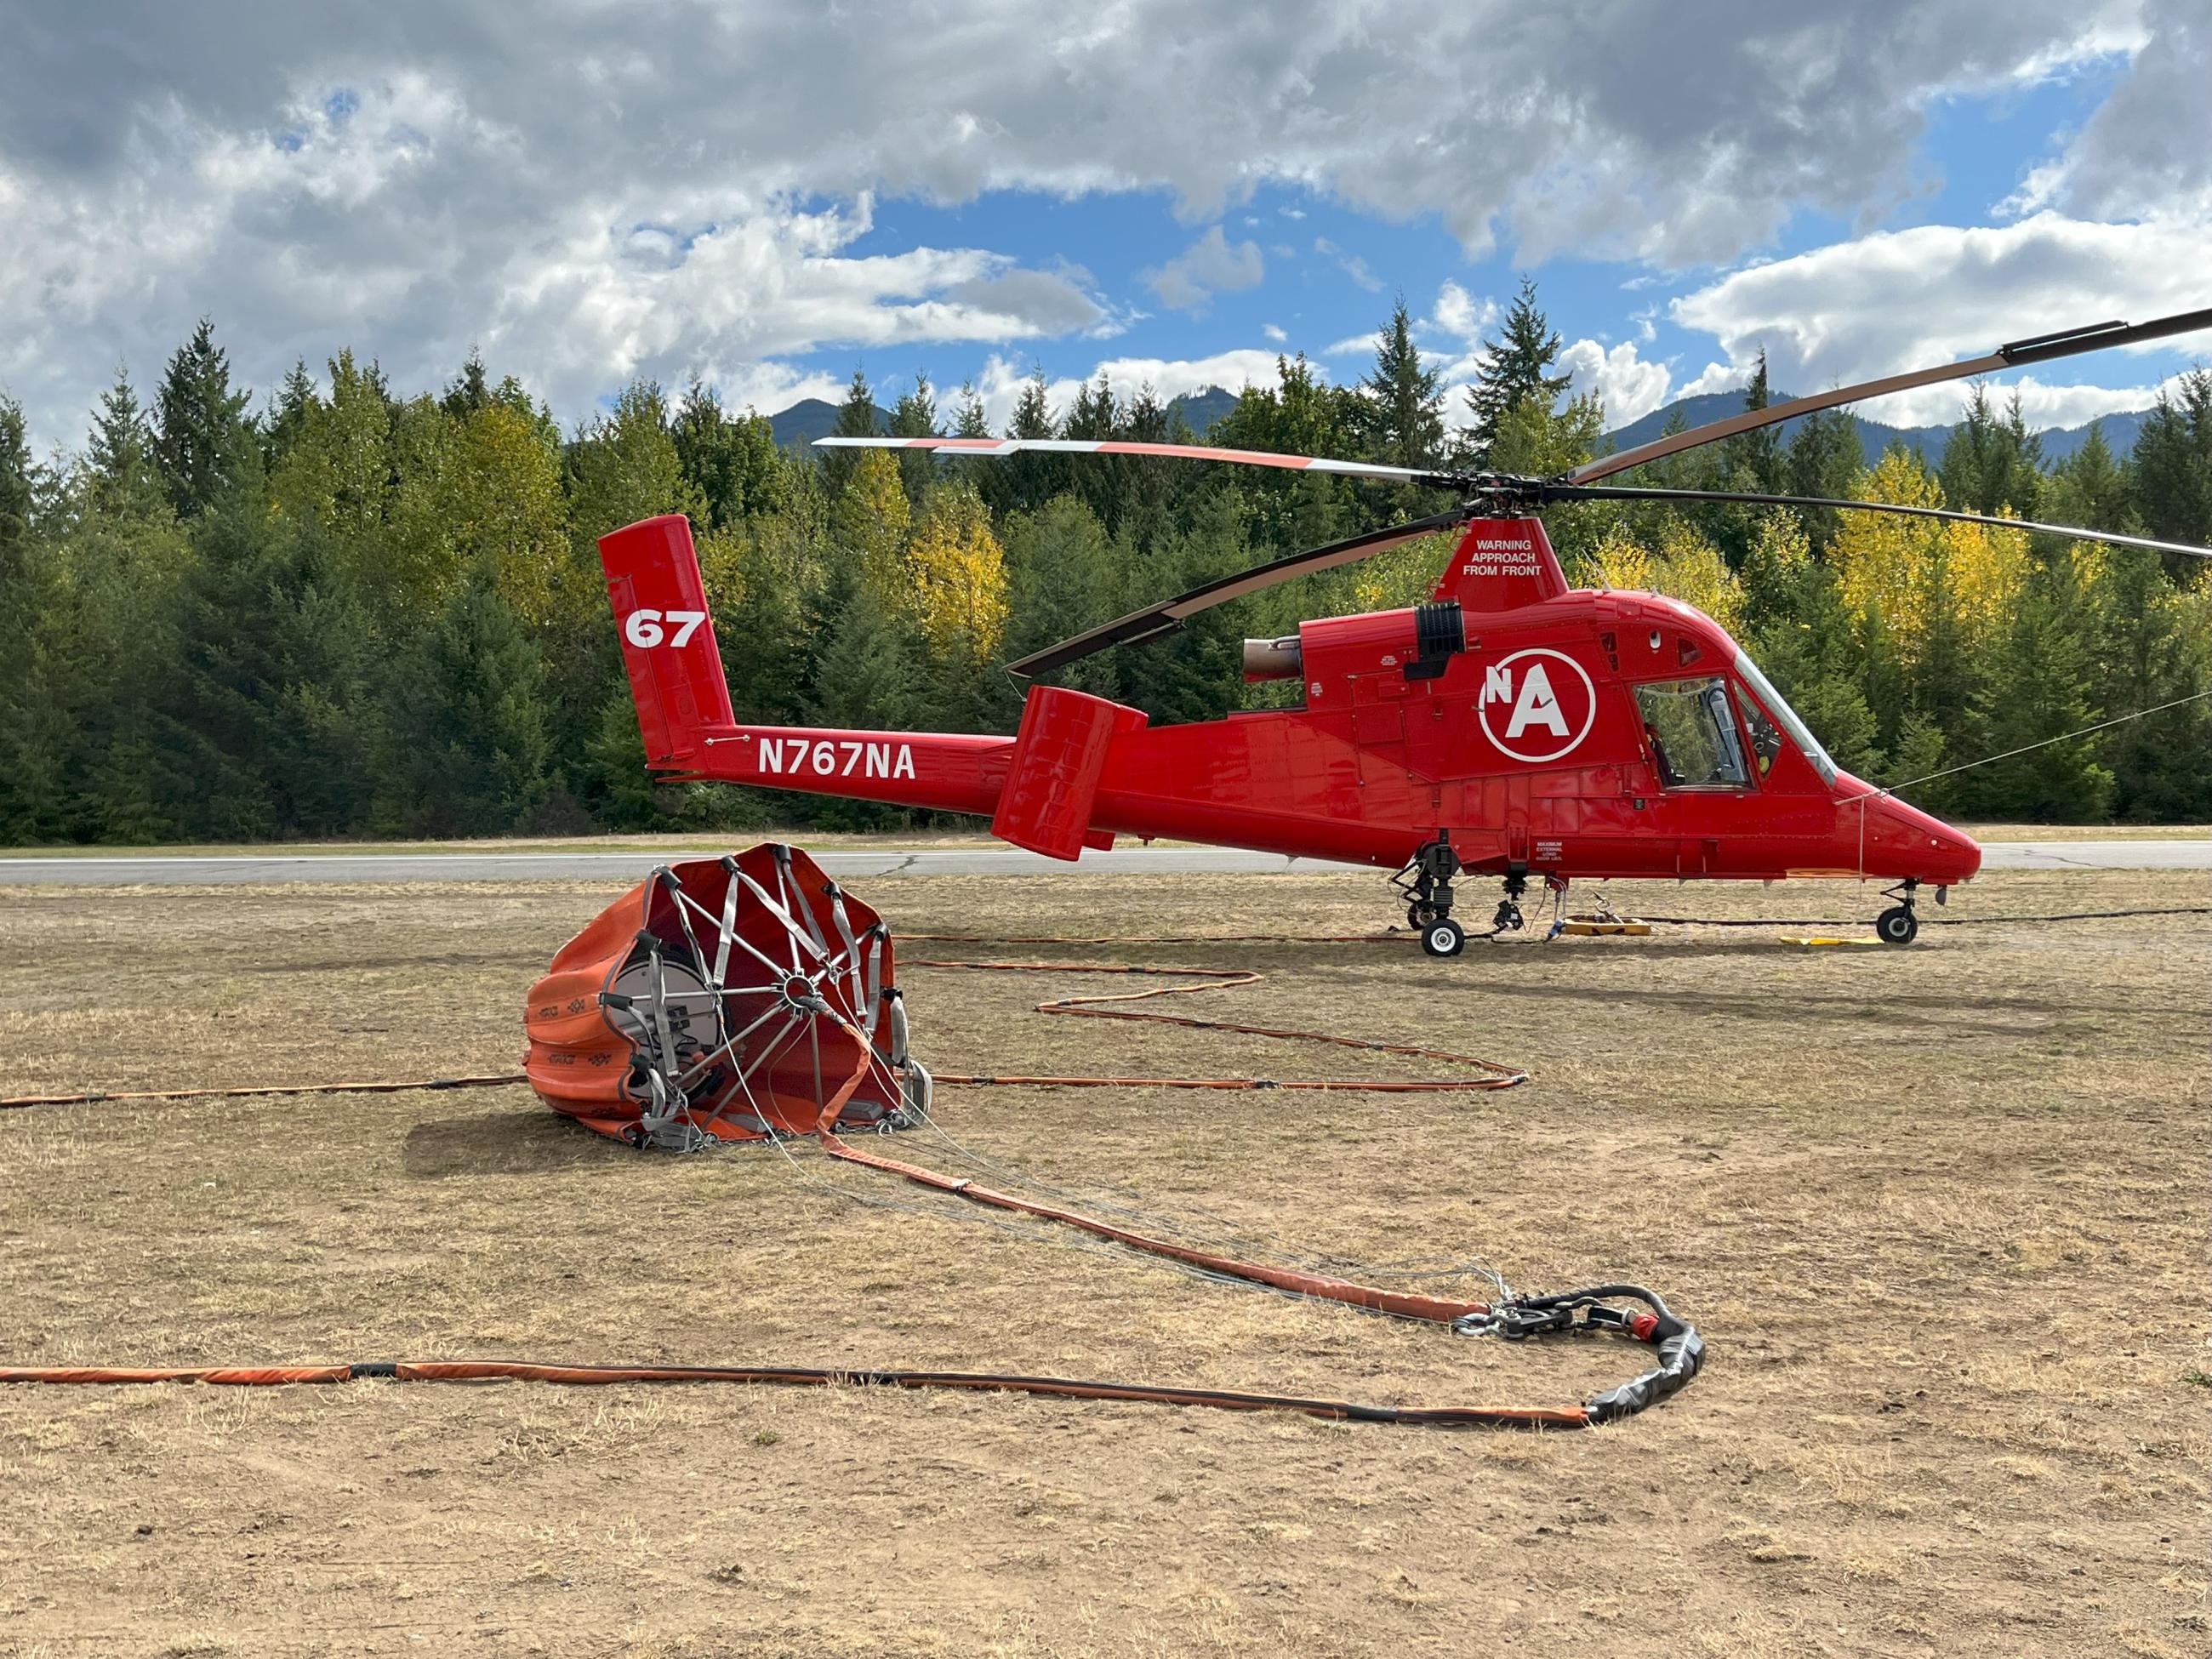 A helicopter sits on the ground with a large bucket for water drops attached and laid out in front of it.